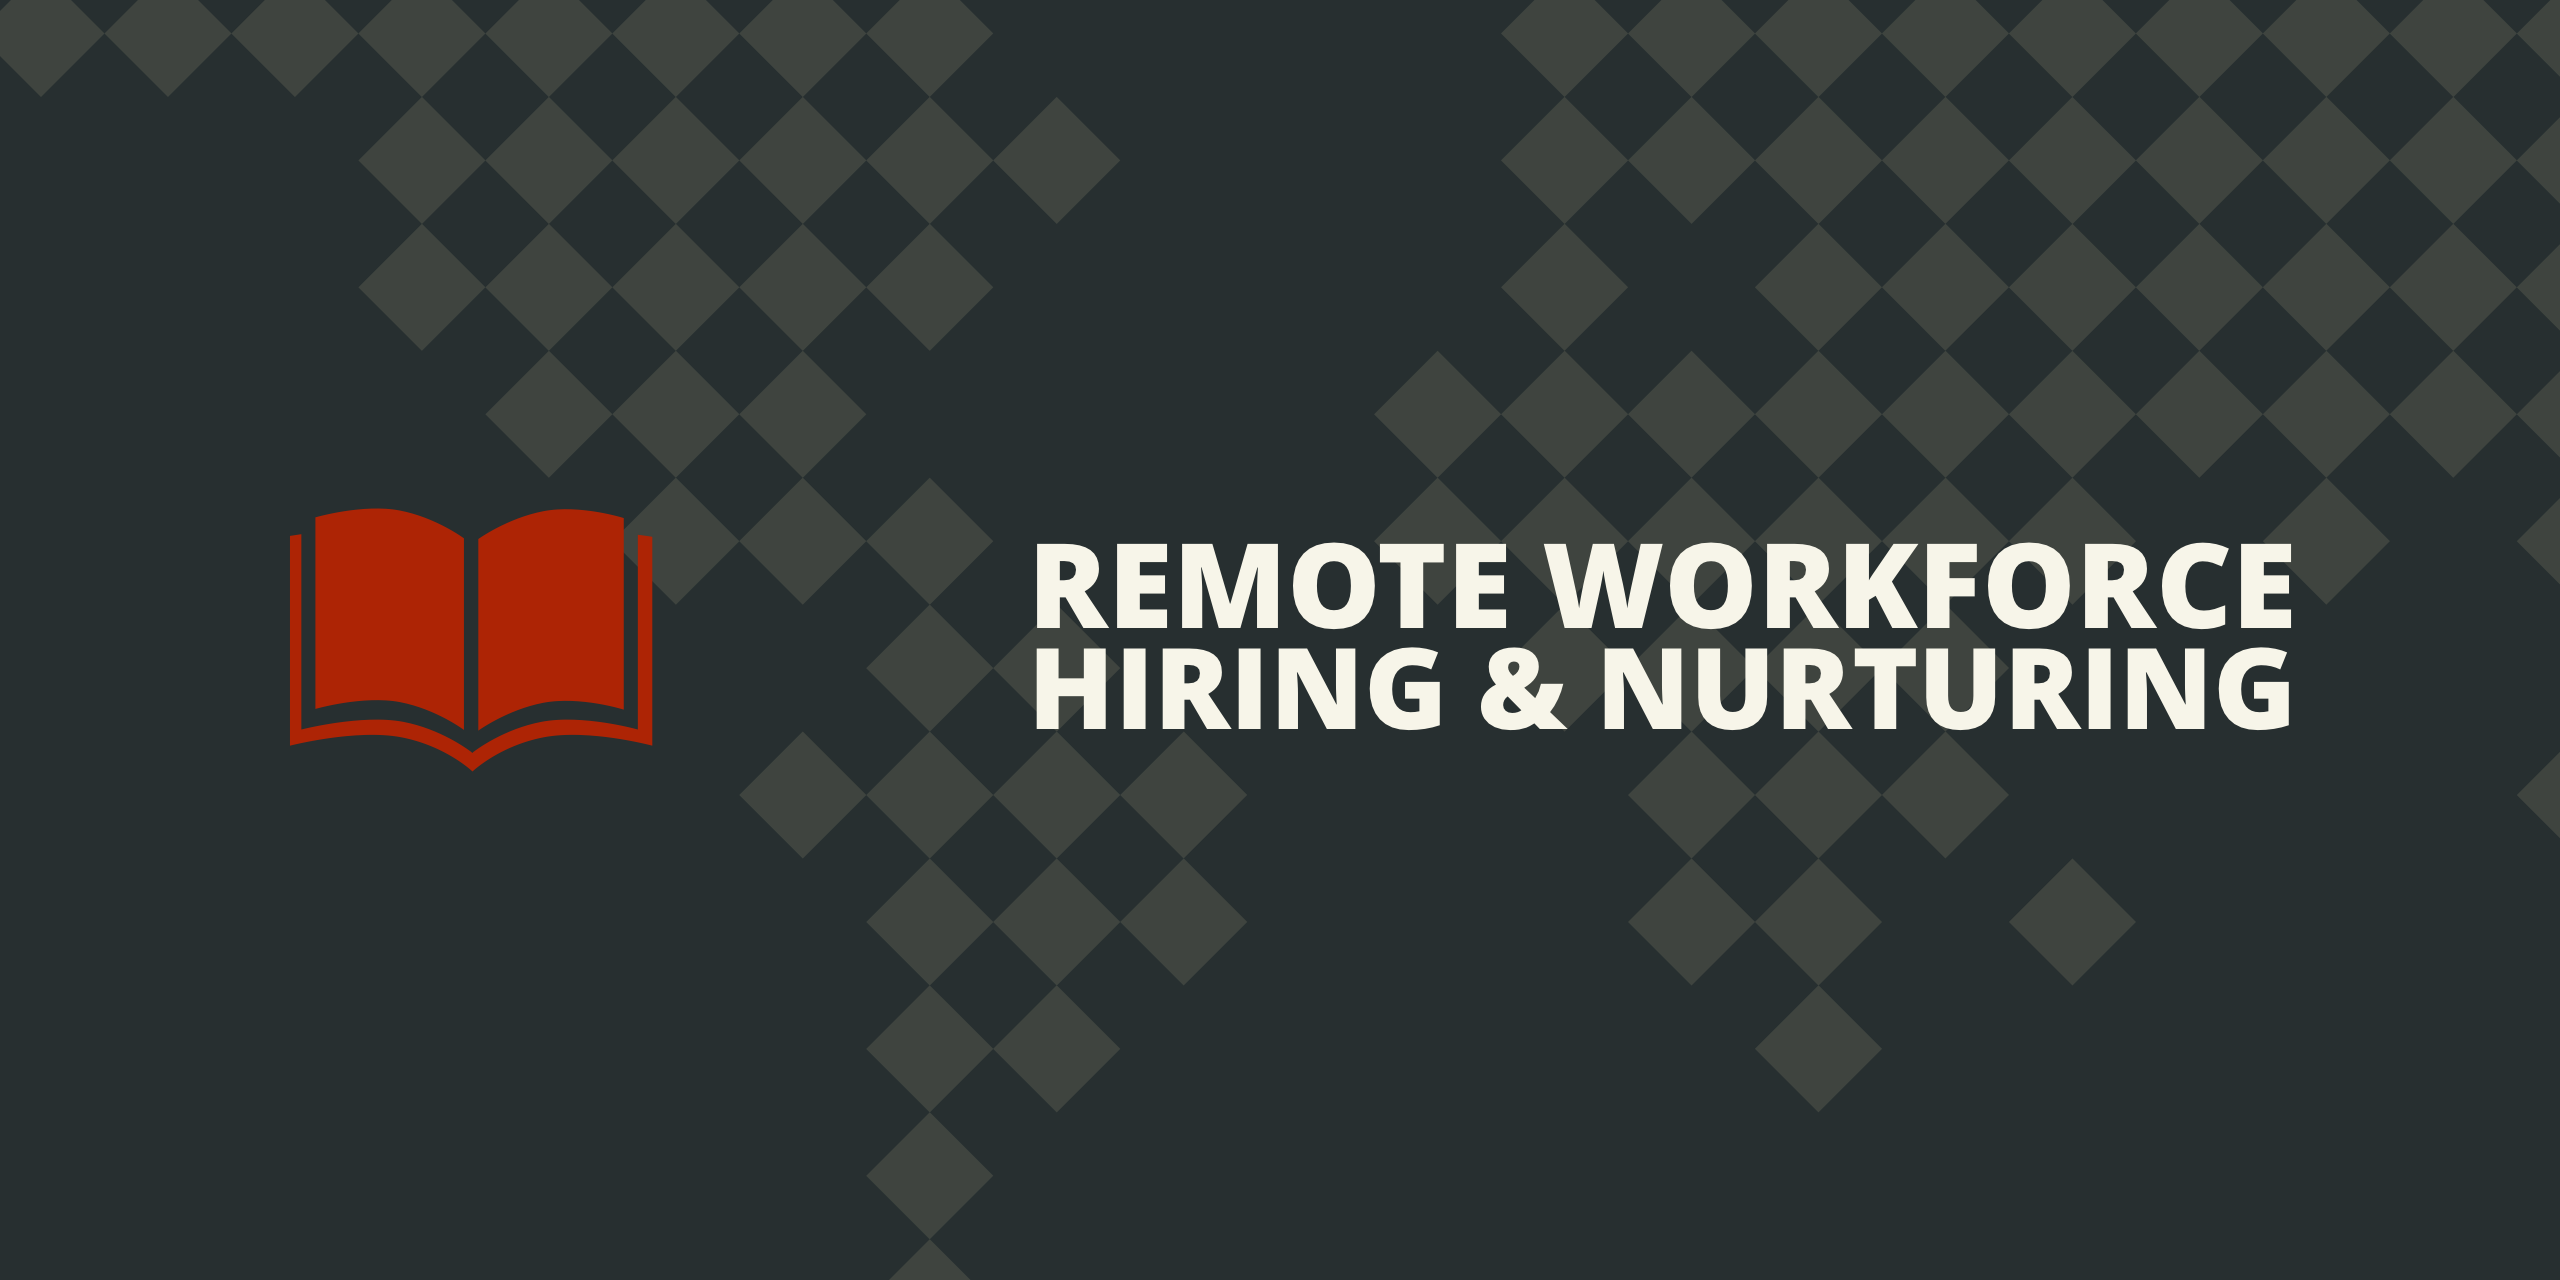 How to recruit and nurture talent for a fully remote workforce software company